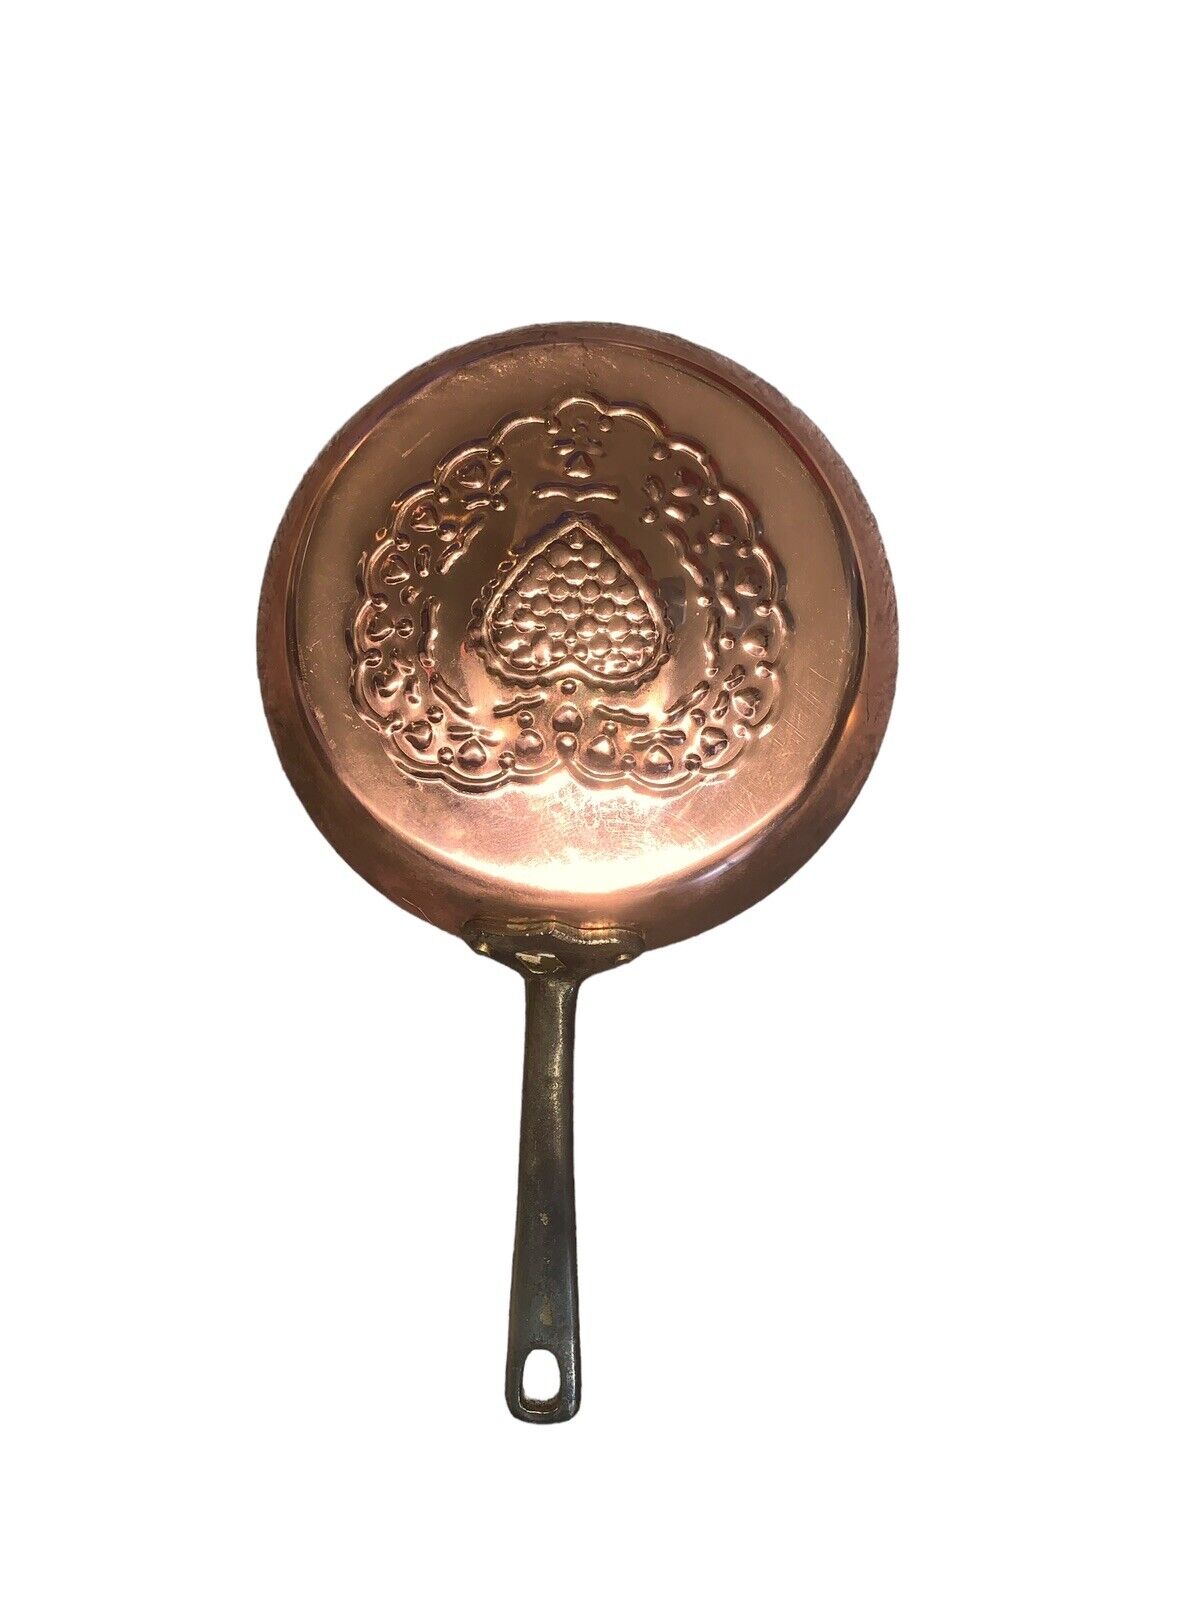 Decorative Copper Pan, Brass Handle, Tin Lined, High Relief Heart Design